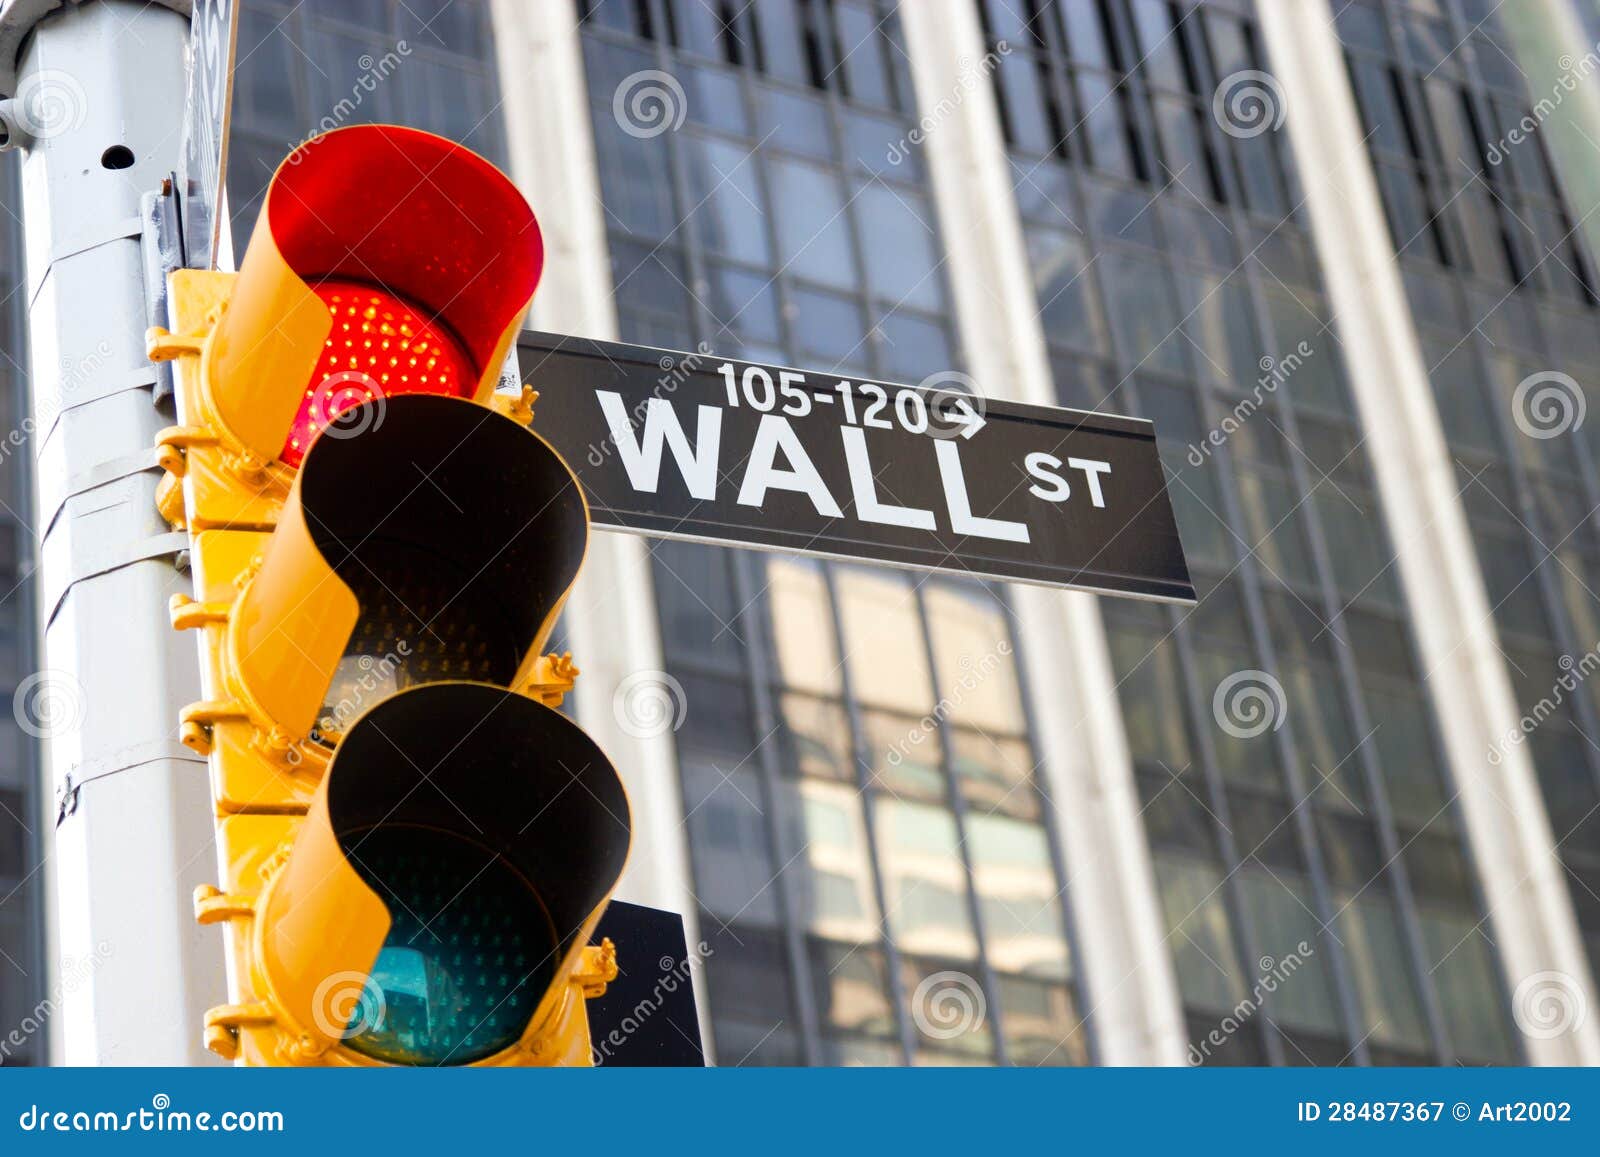 wall street sign and red traffic light, new york